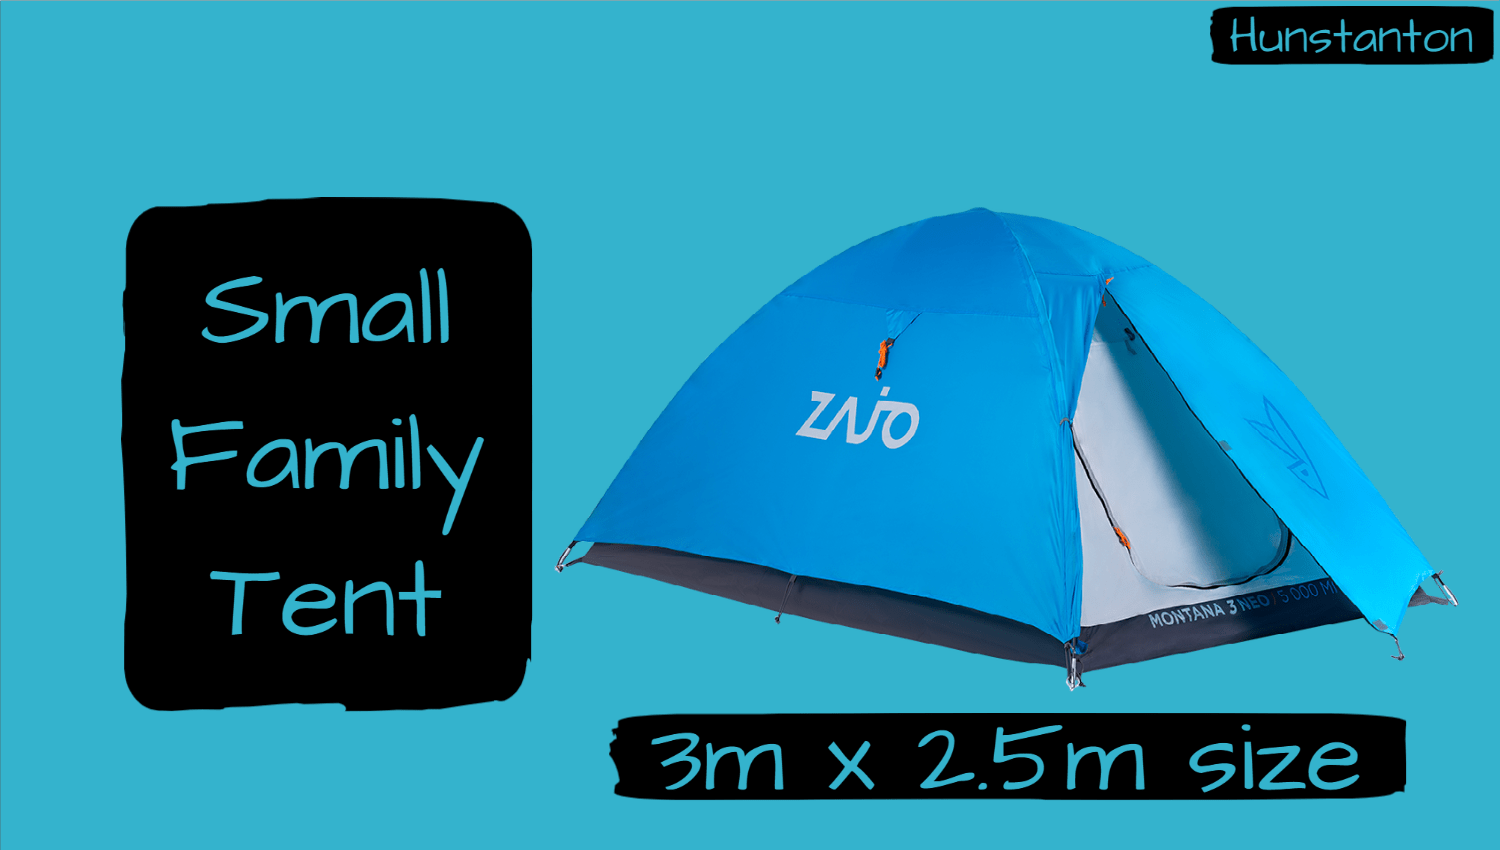 Small Family tent on a blue background with sizing